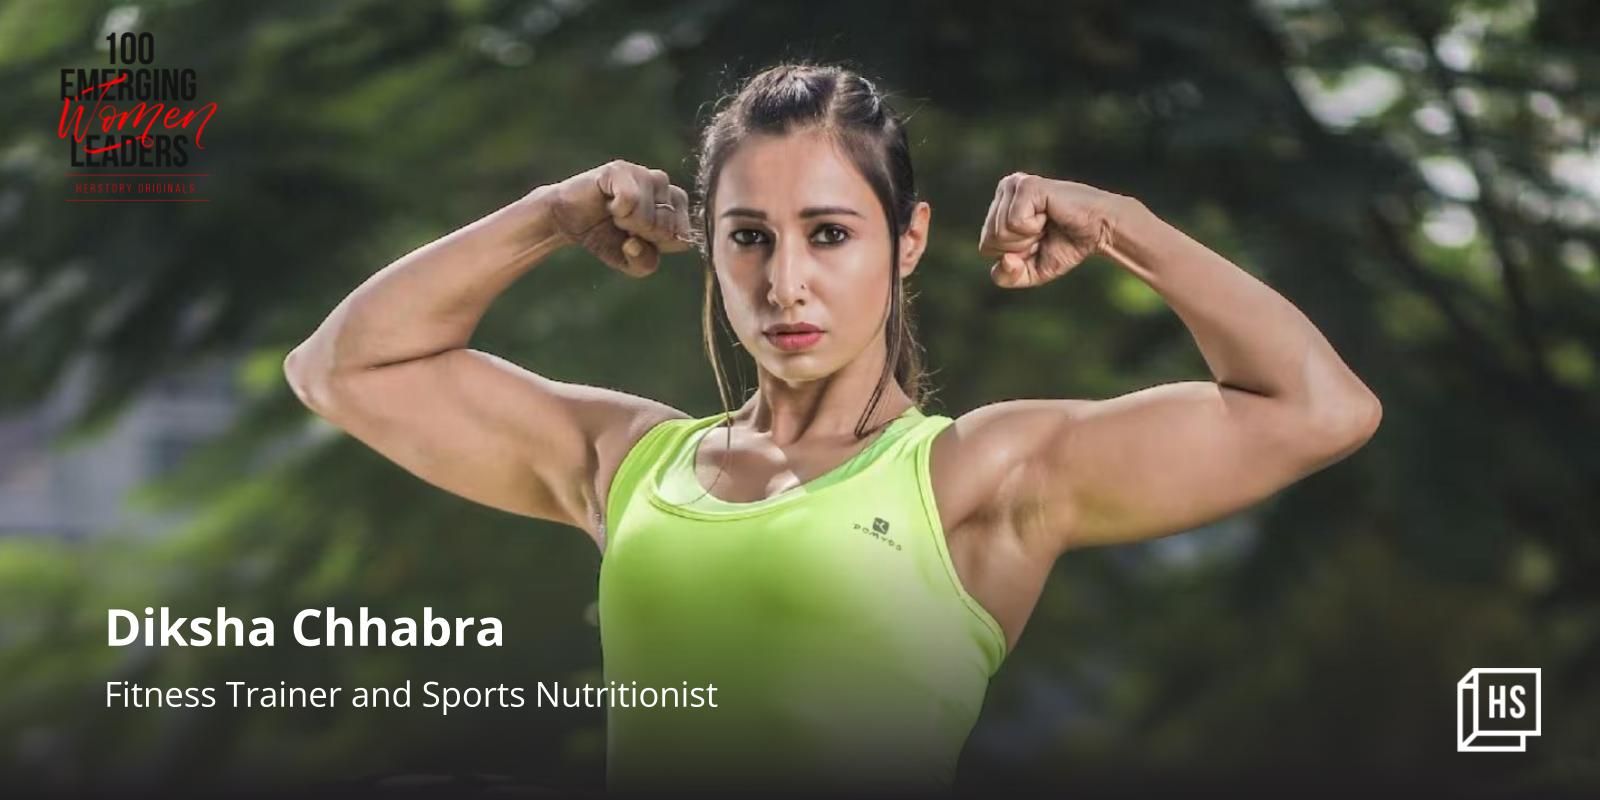 [100 Emerging Women Leaders] This fitness coach is challenging stereotypes and making her way in the fitness industry
